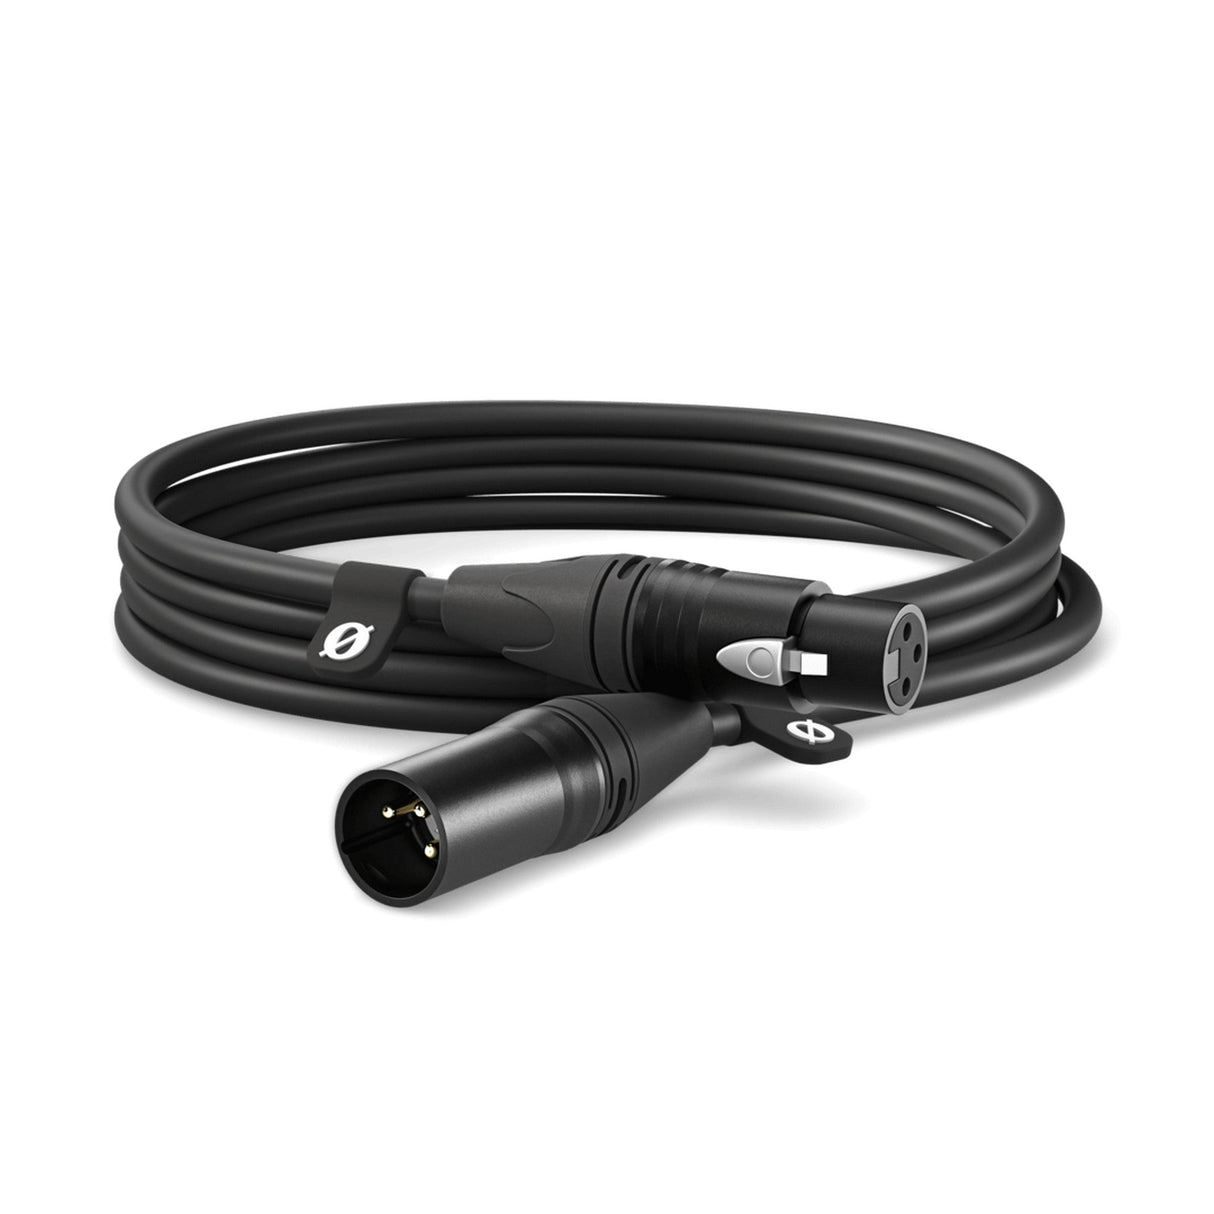 RODE XLR-3 3-Foot Premium Male to Female XLR Cable, Black (Used)